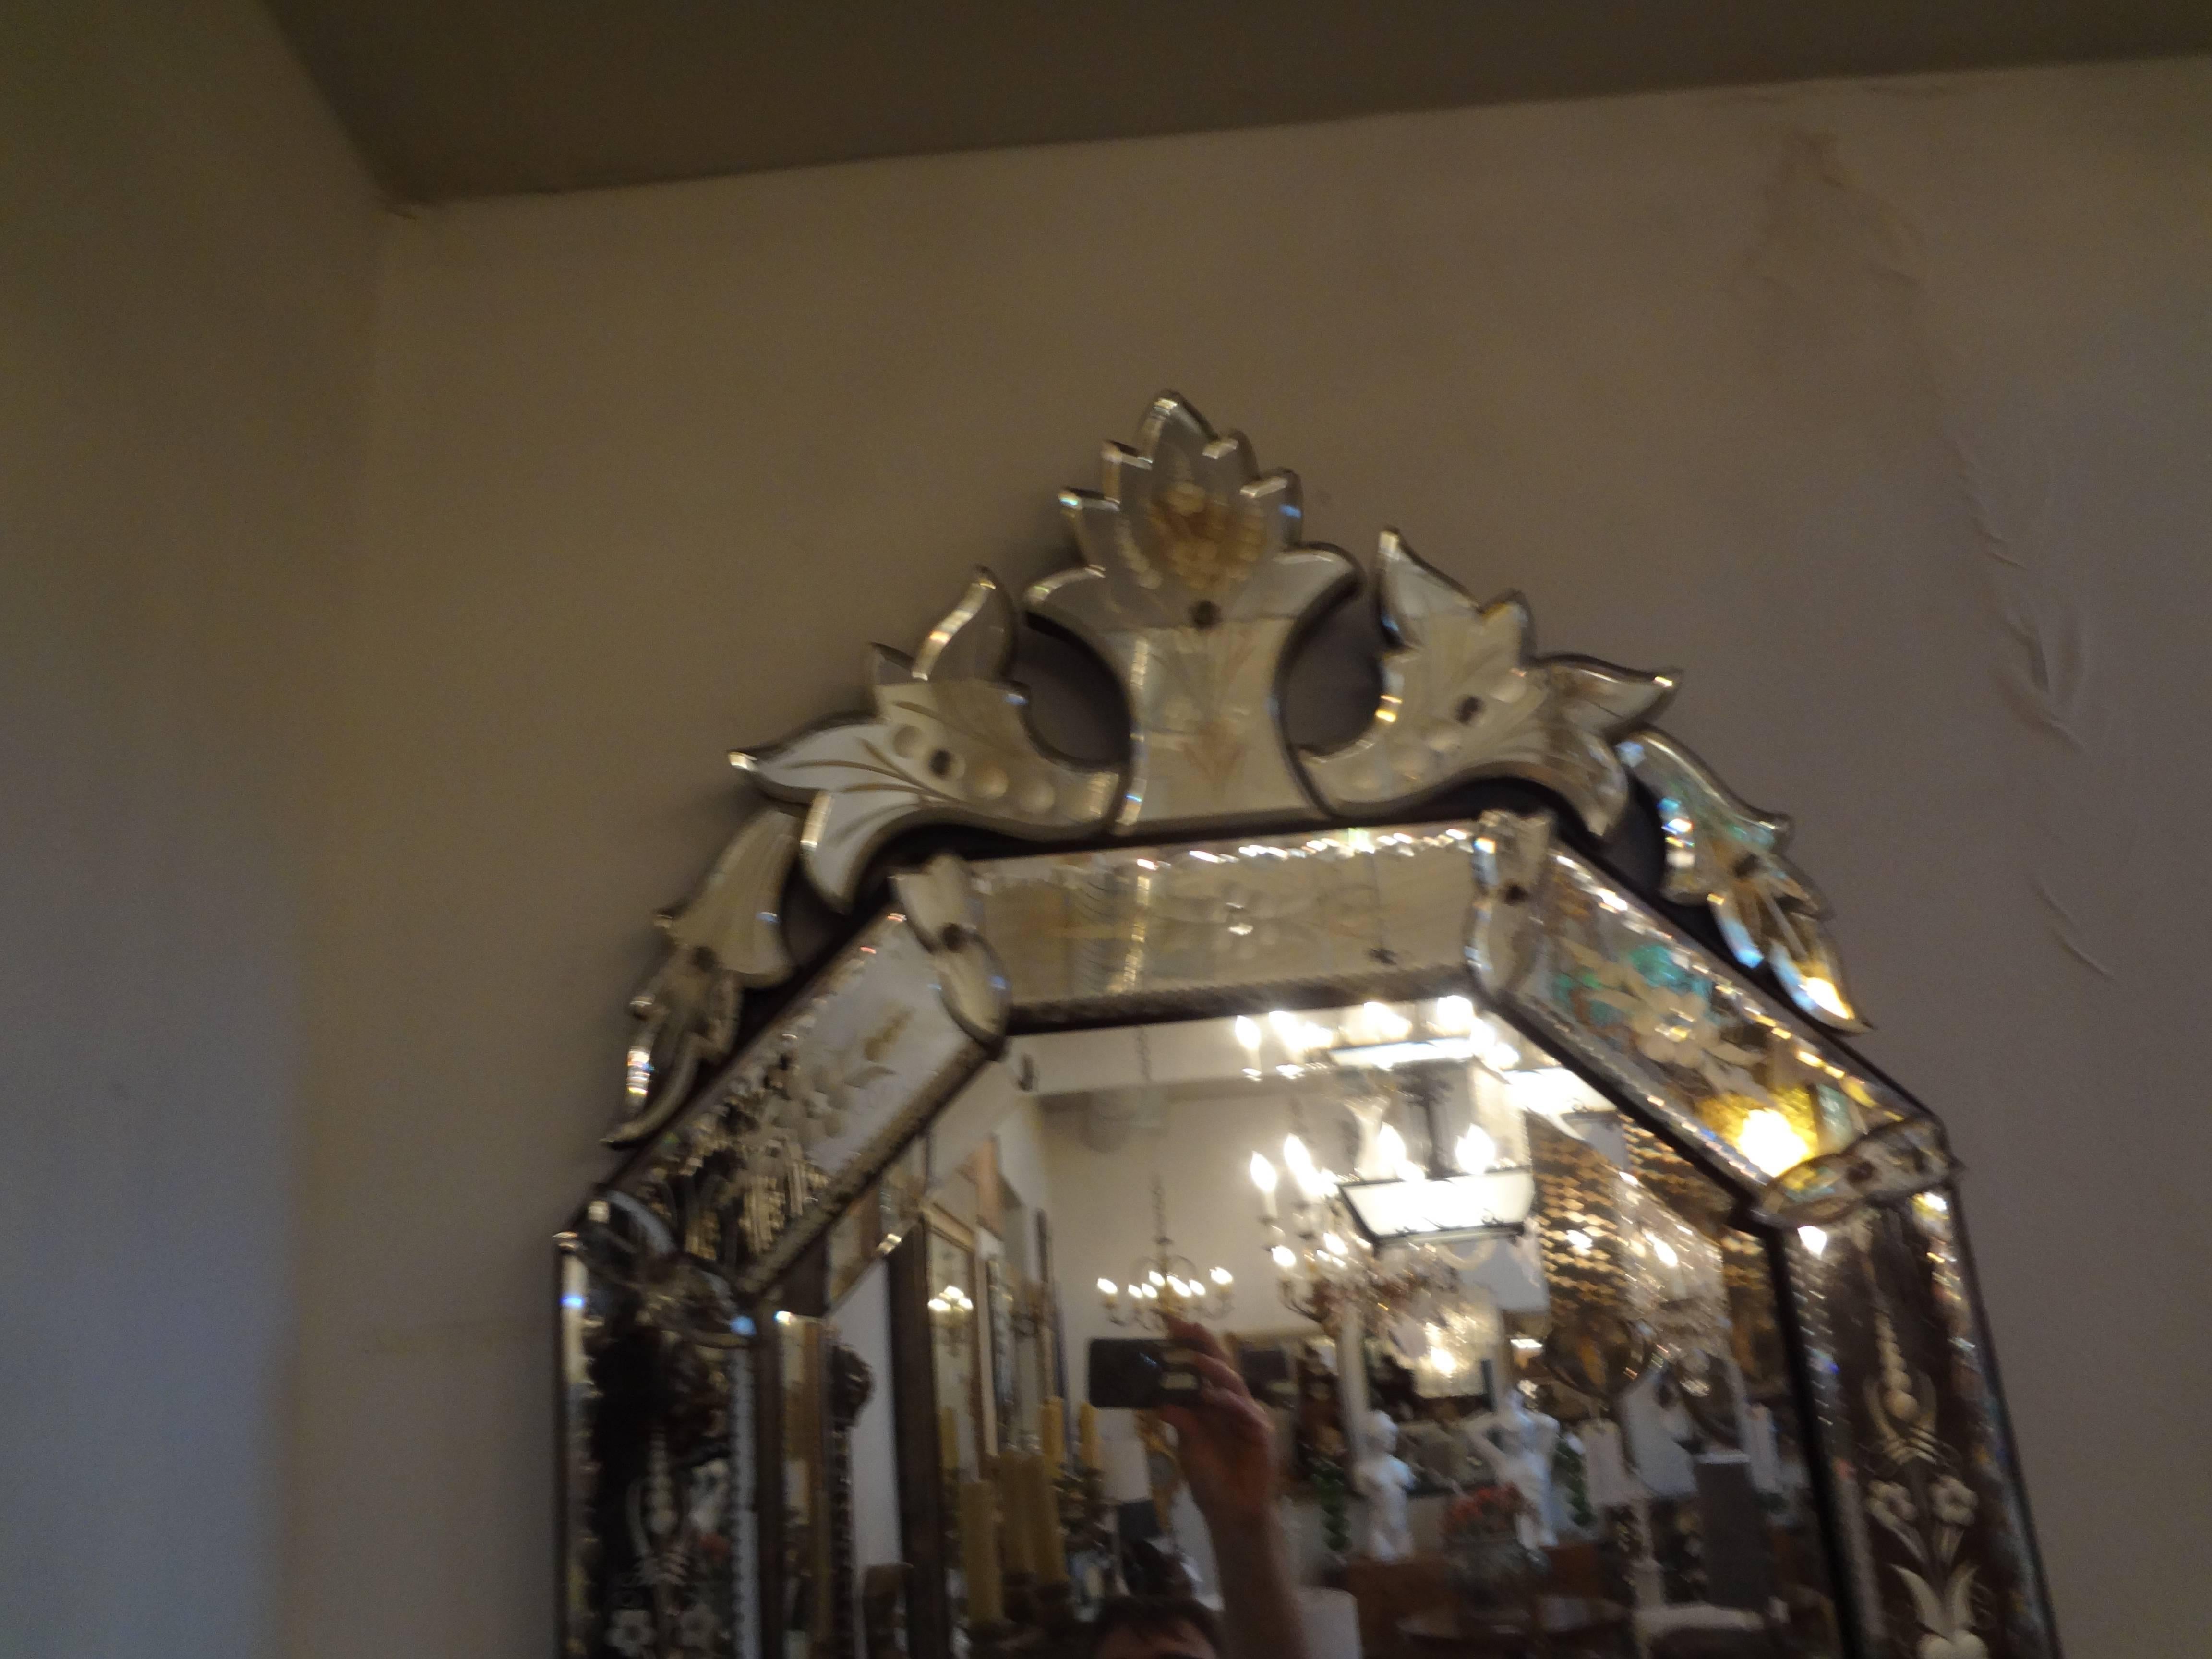 Antique Etched and beveled octagon shaped venetian glass mirror, circa 1920.

Please click Kirby Antiques logo below to view additional pieces from our vast inventory.